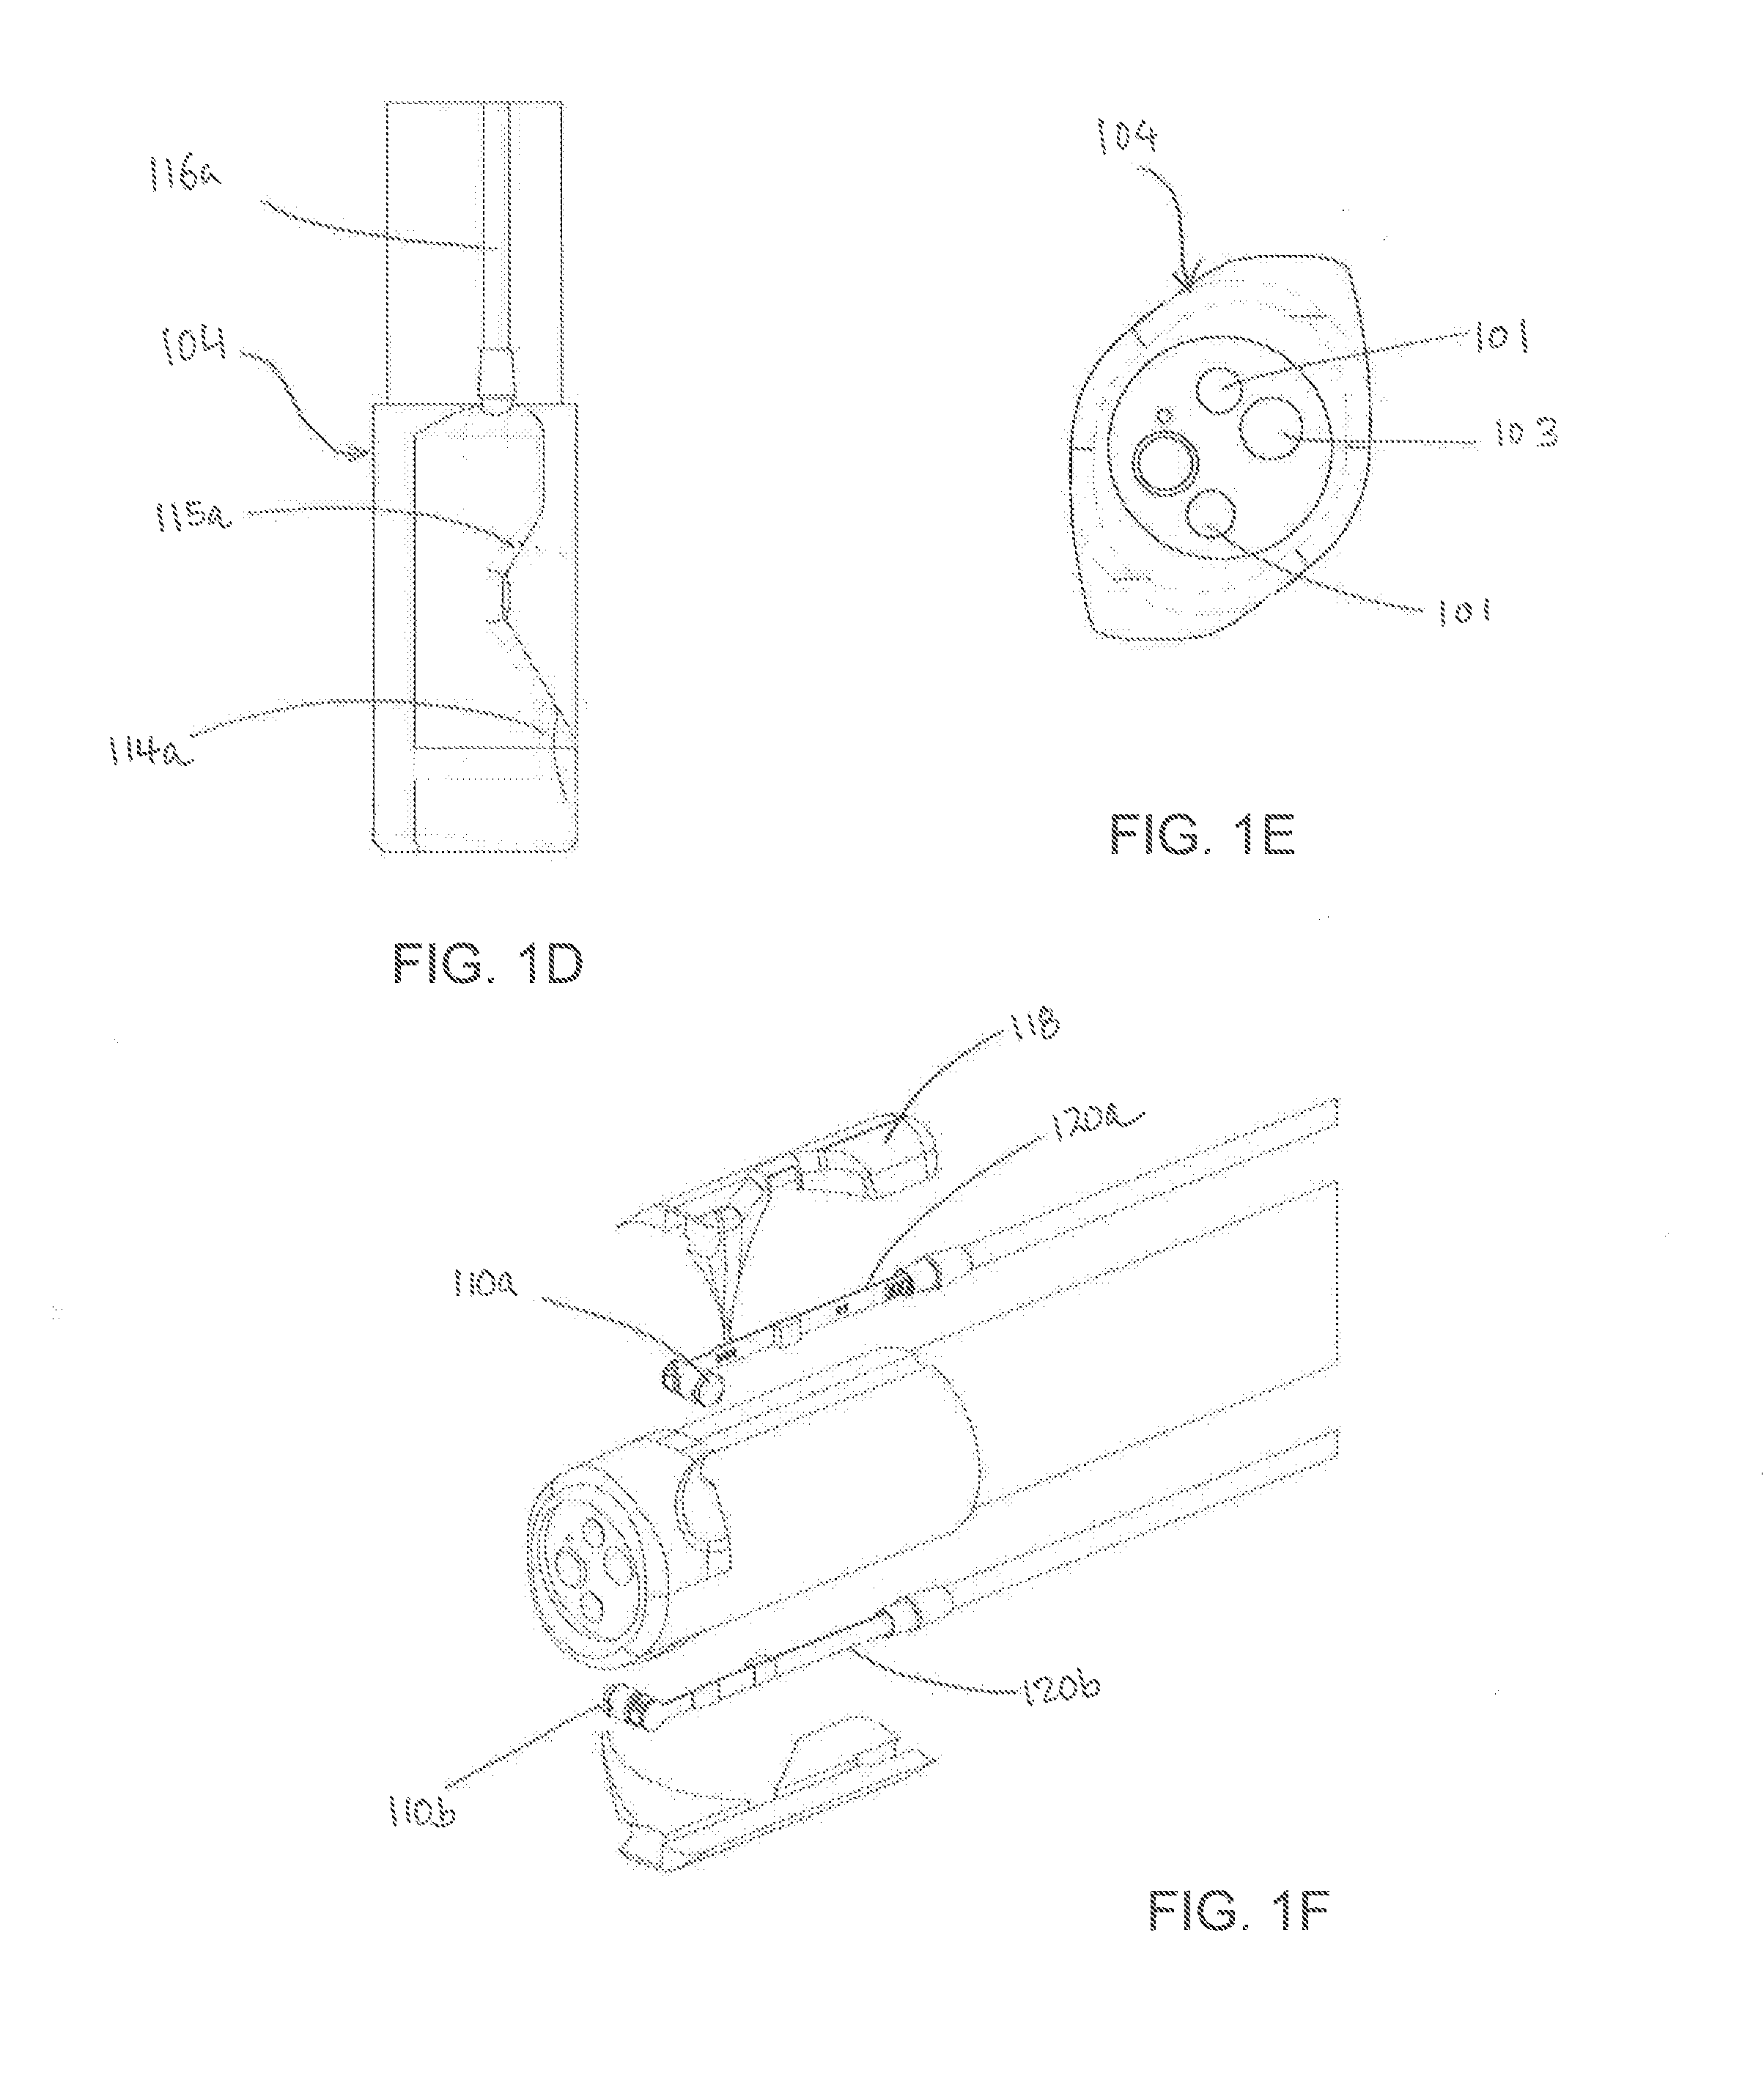 Secondary imaging endoscopic device